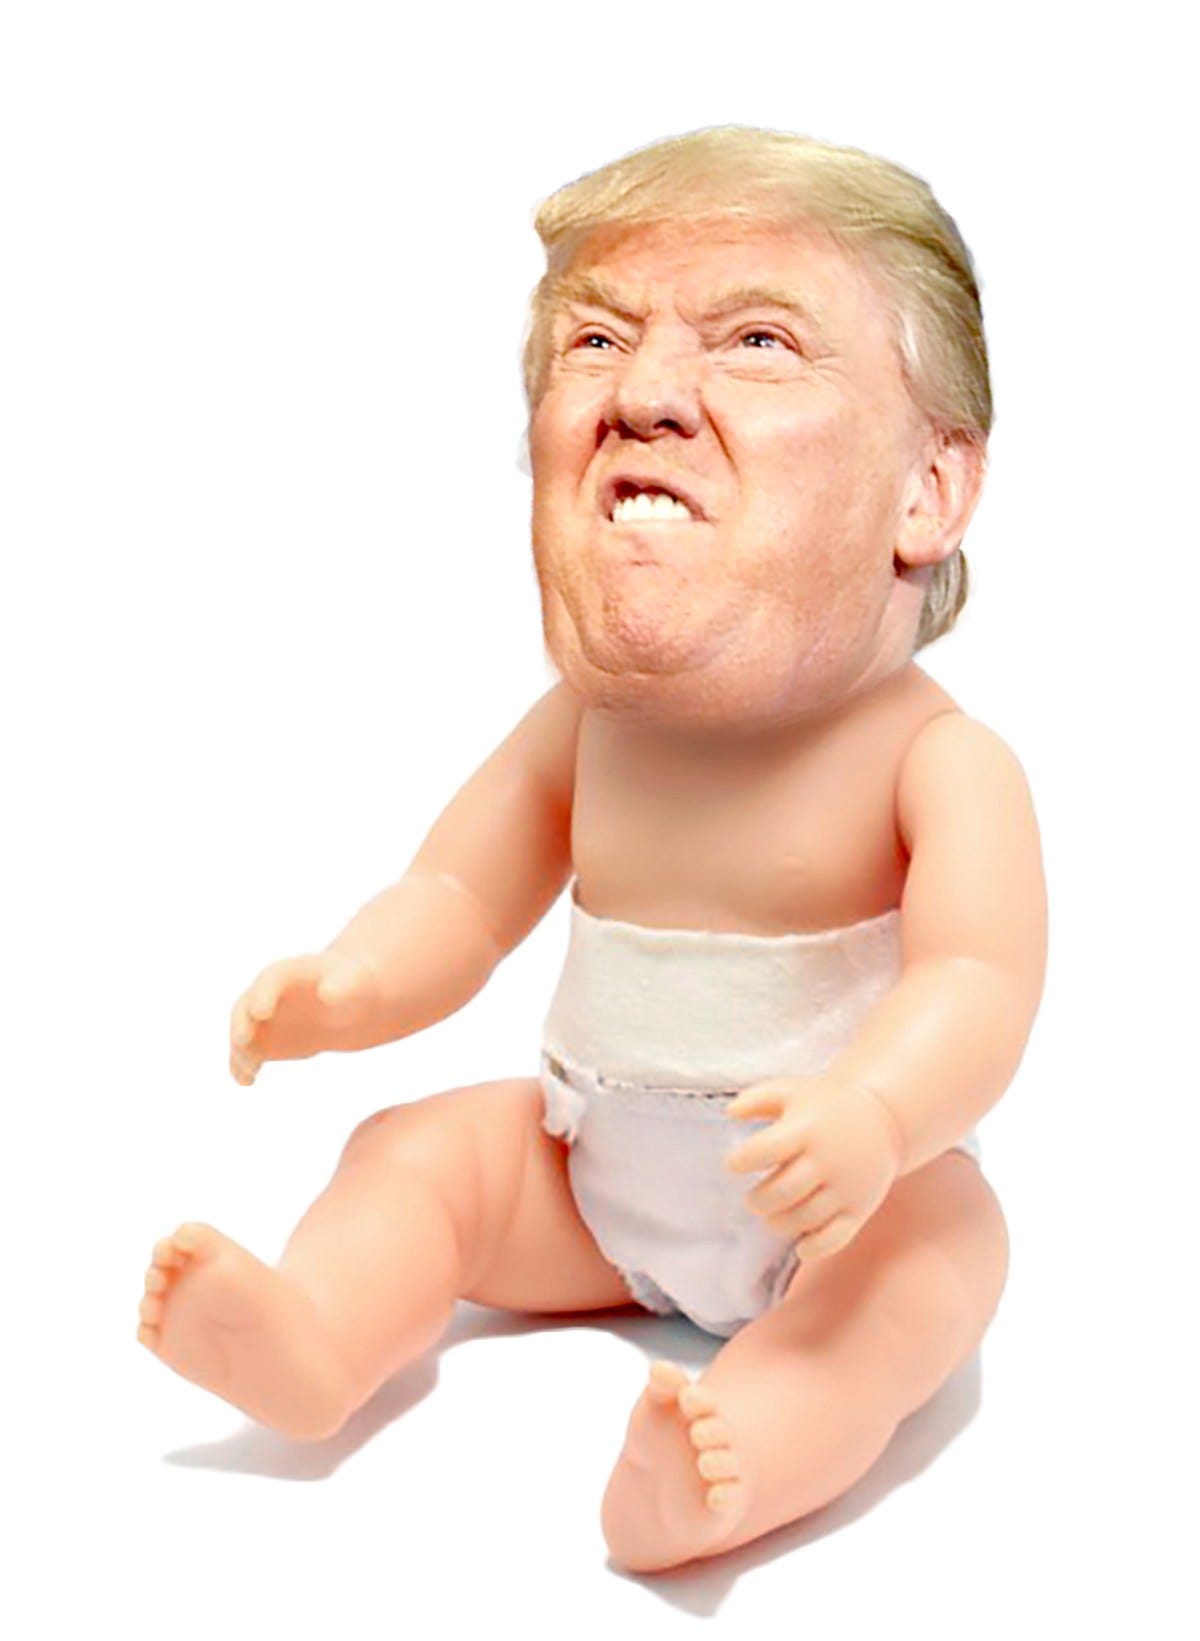 Meet Baby Trump: the reality doll - Wednesday Journal